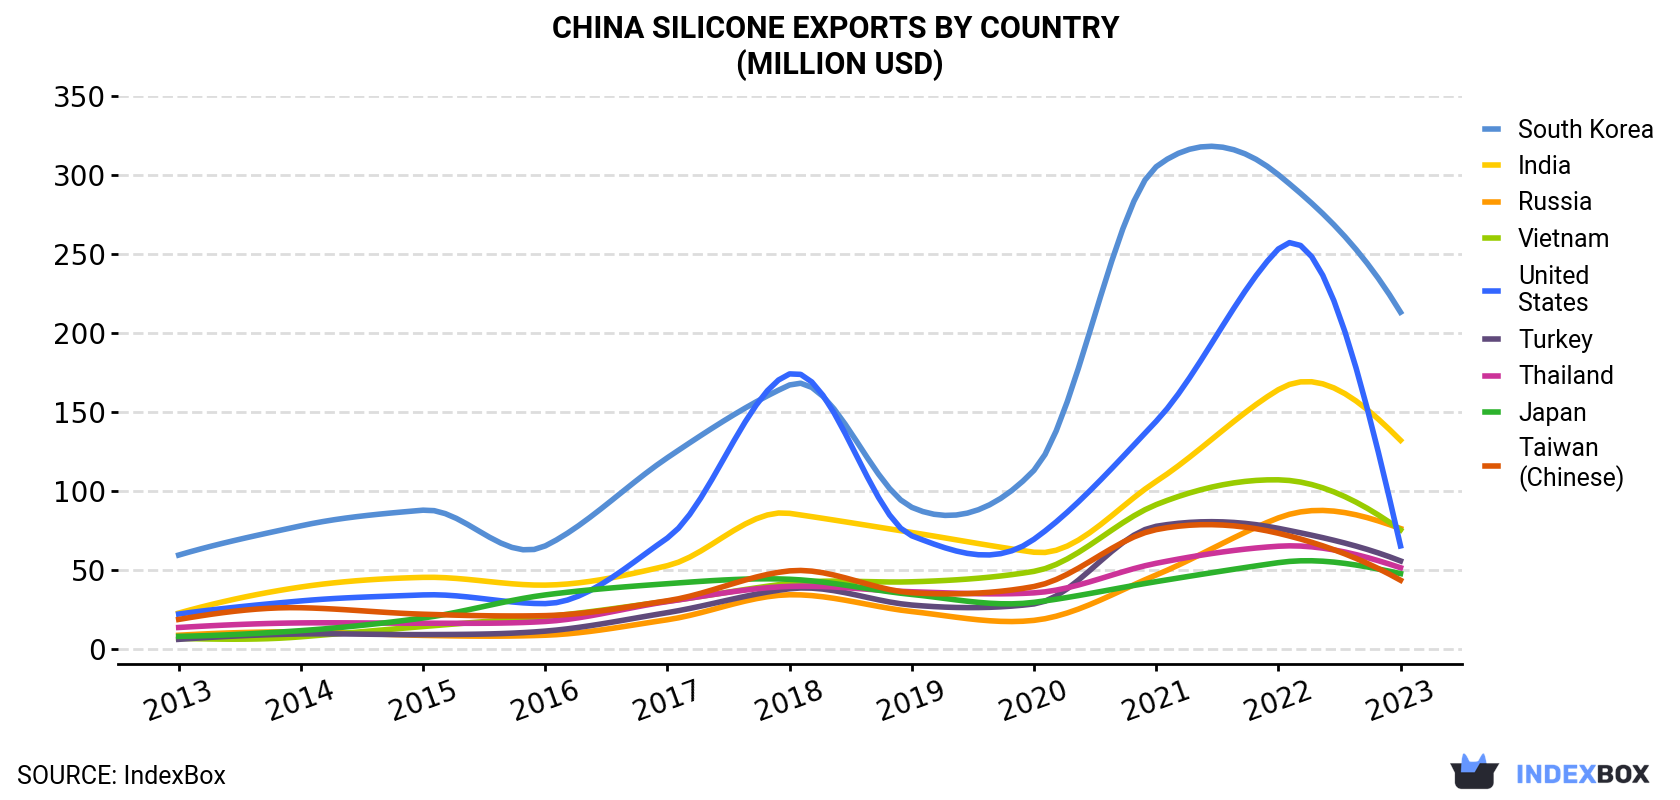 China Silicone Exports By Country (Million USD)